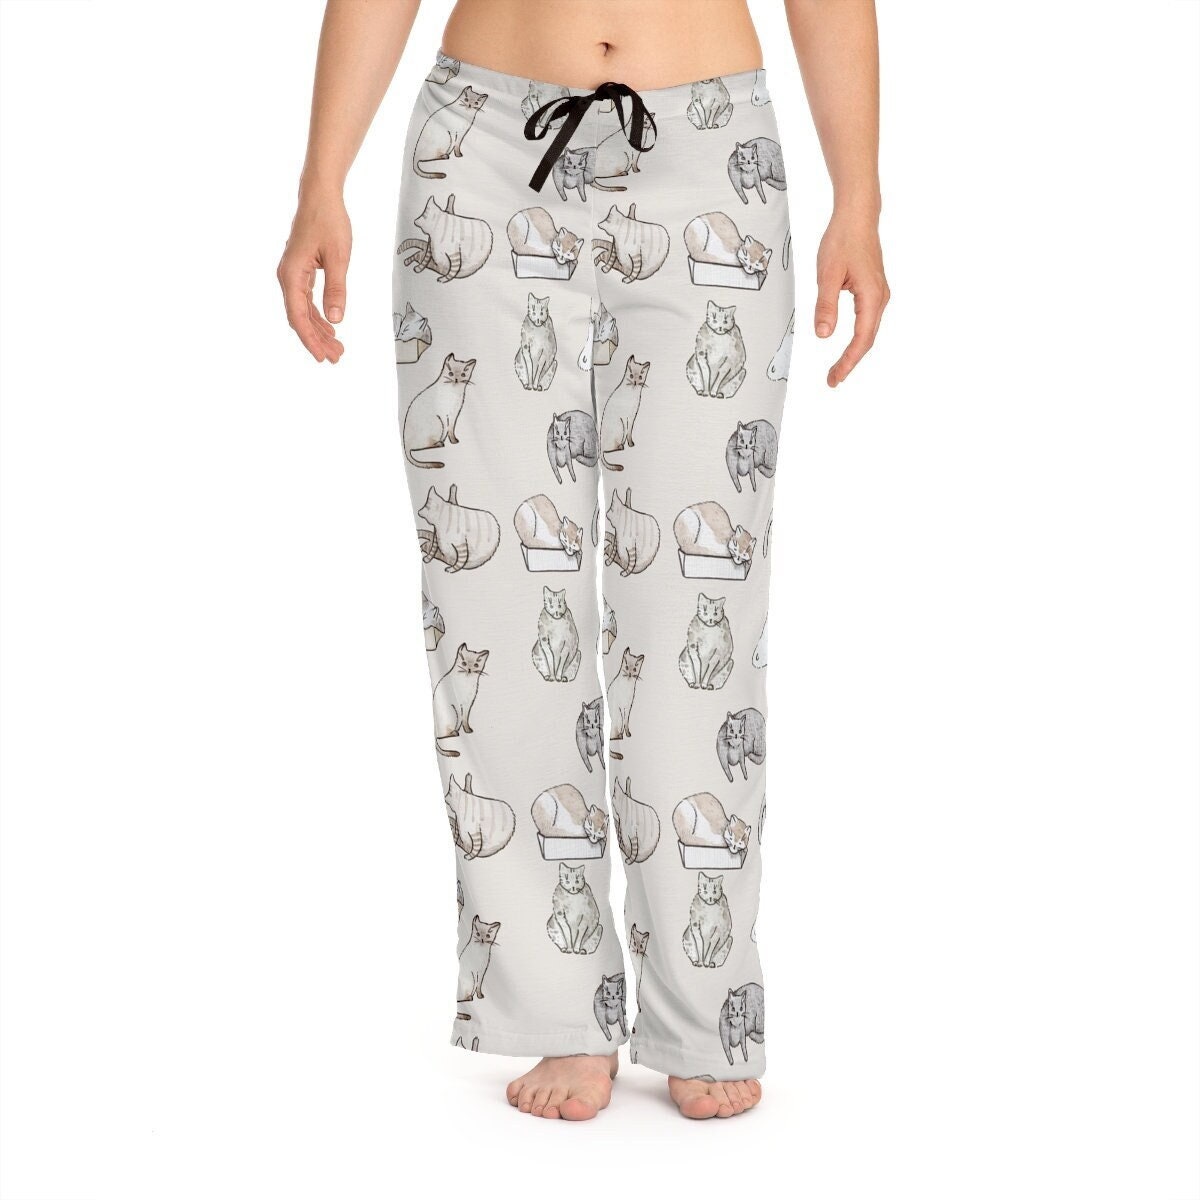 Bunny Rabbit Women's Pajama Pants in White or Grey, Relaxed Fit. All Over  Print. Ladies Sleepwear Bottoms. Gift for Rabbit Lovers 